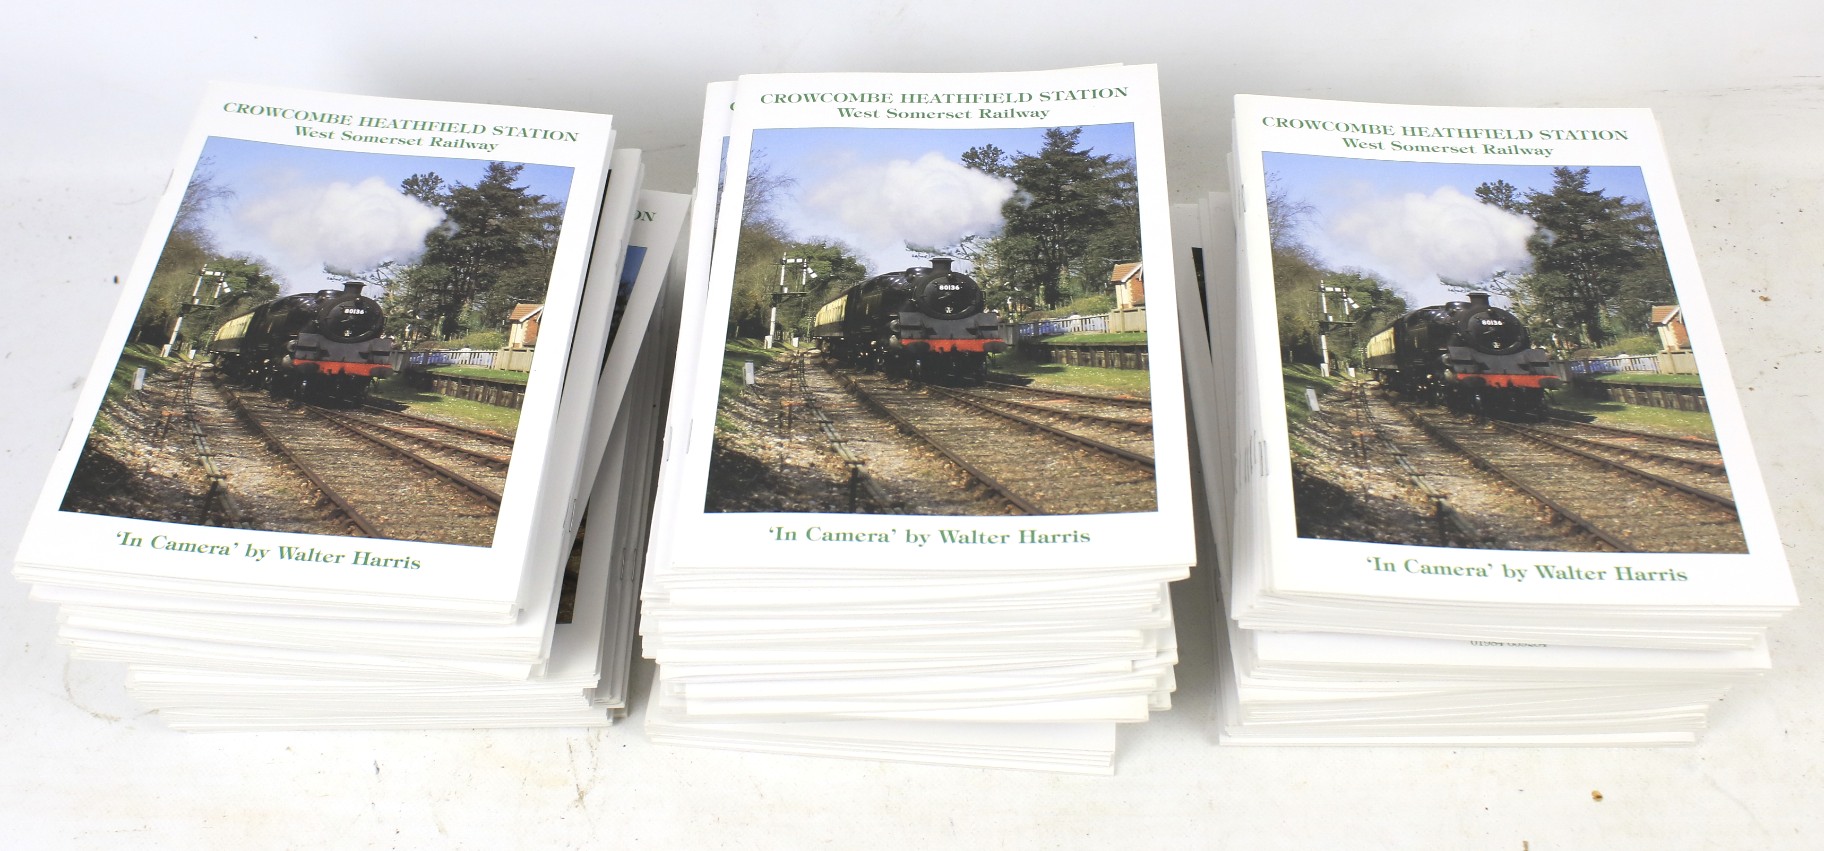 A box of Crowcombe Heathfield Station West Somerset Railway booklets.